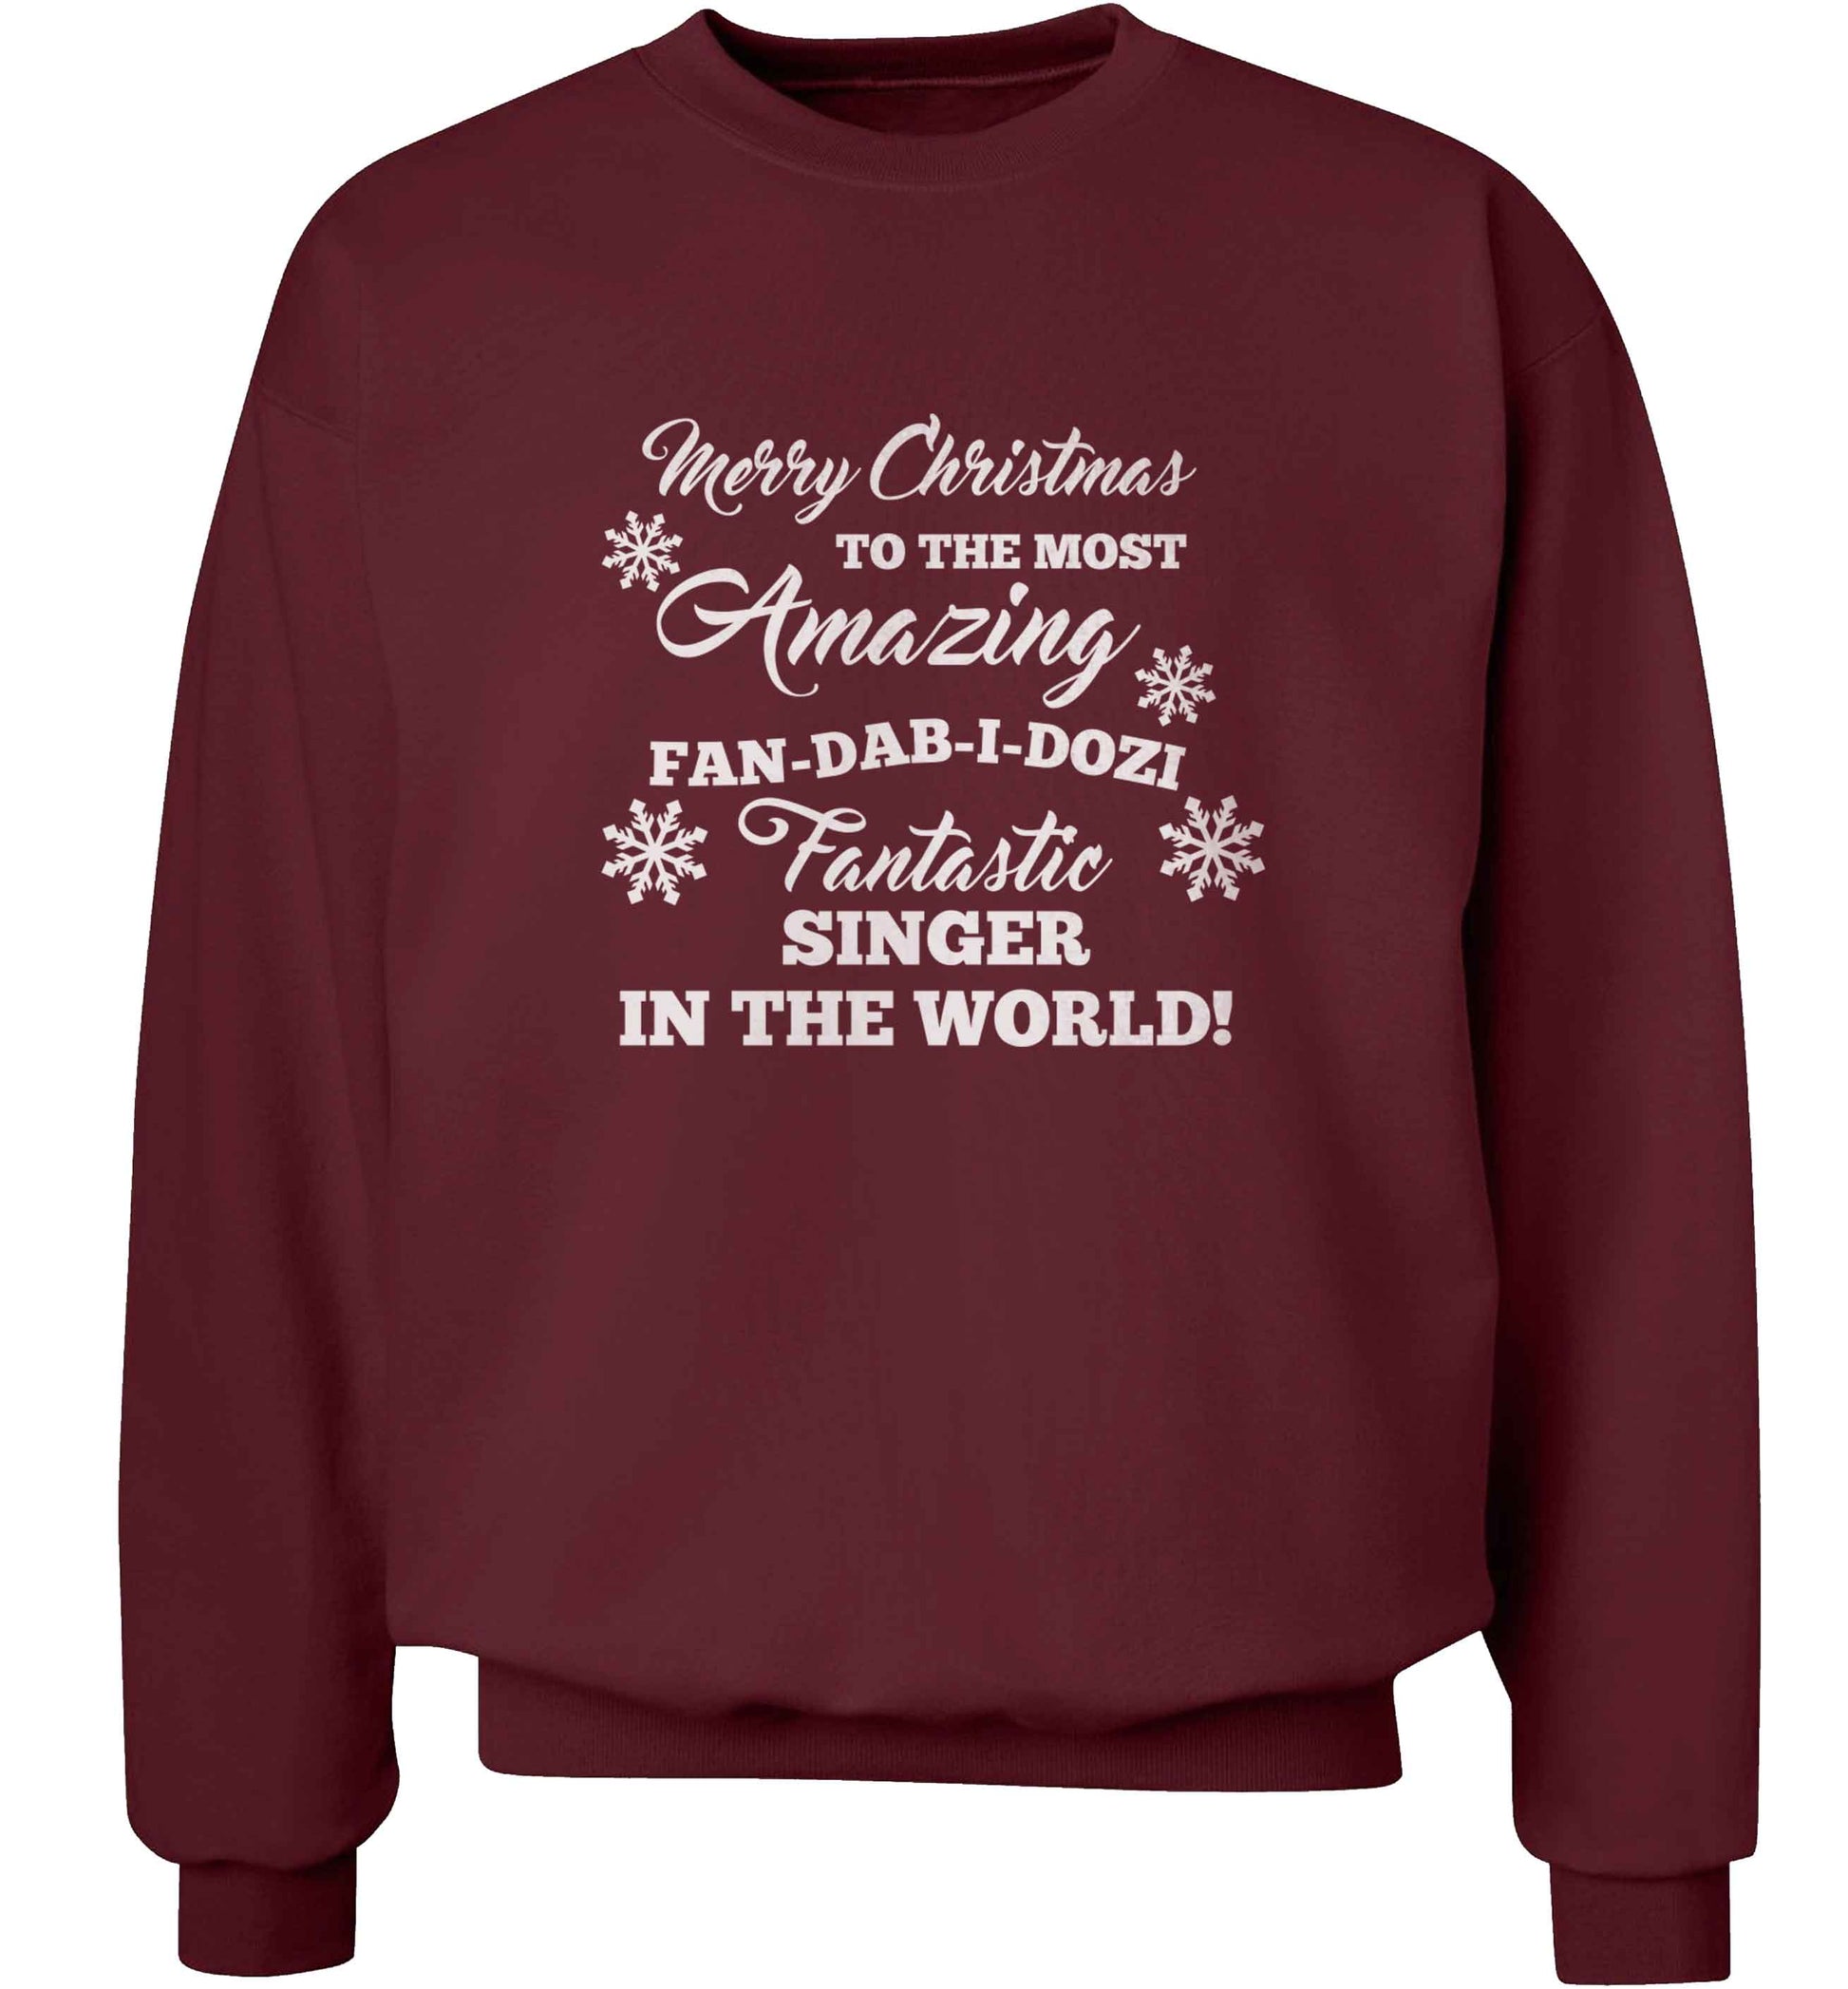 Merry Christmas to the most amazing singer in the world! adult's unisex maroon sweater 2XL